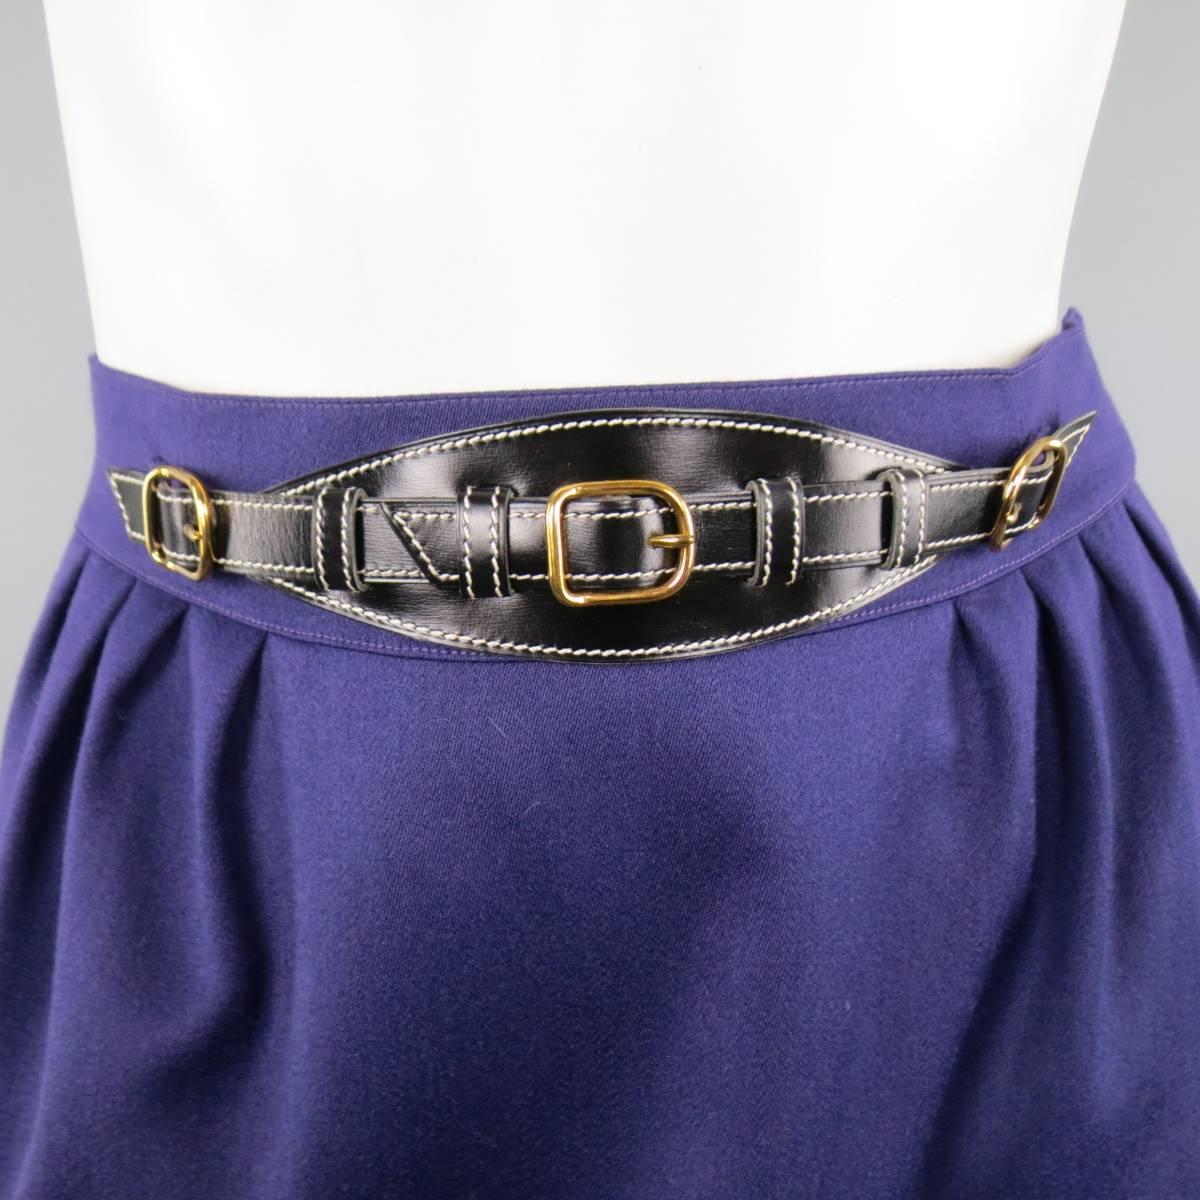 Vintage HERMES pencil skirt in a purple wool featuring a thick waistband with detachable frontal belt detail with gold tone hardware and contrast stitching. Made in France.
 
Excellent Pre-Owned Condition.
Marked: FR 38
 
Measurements:
 
Waist: 27